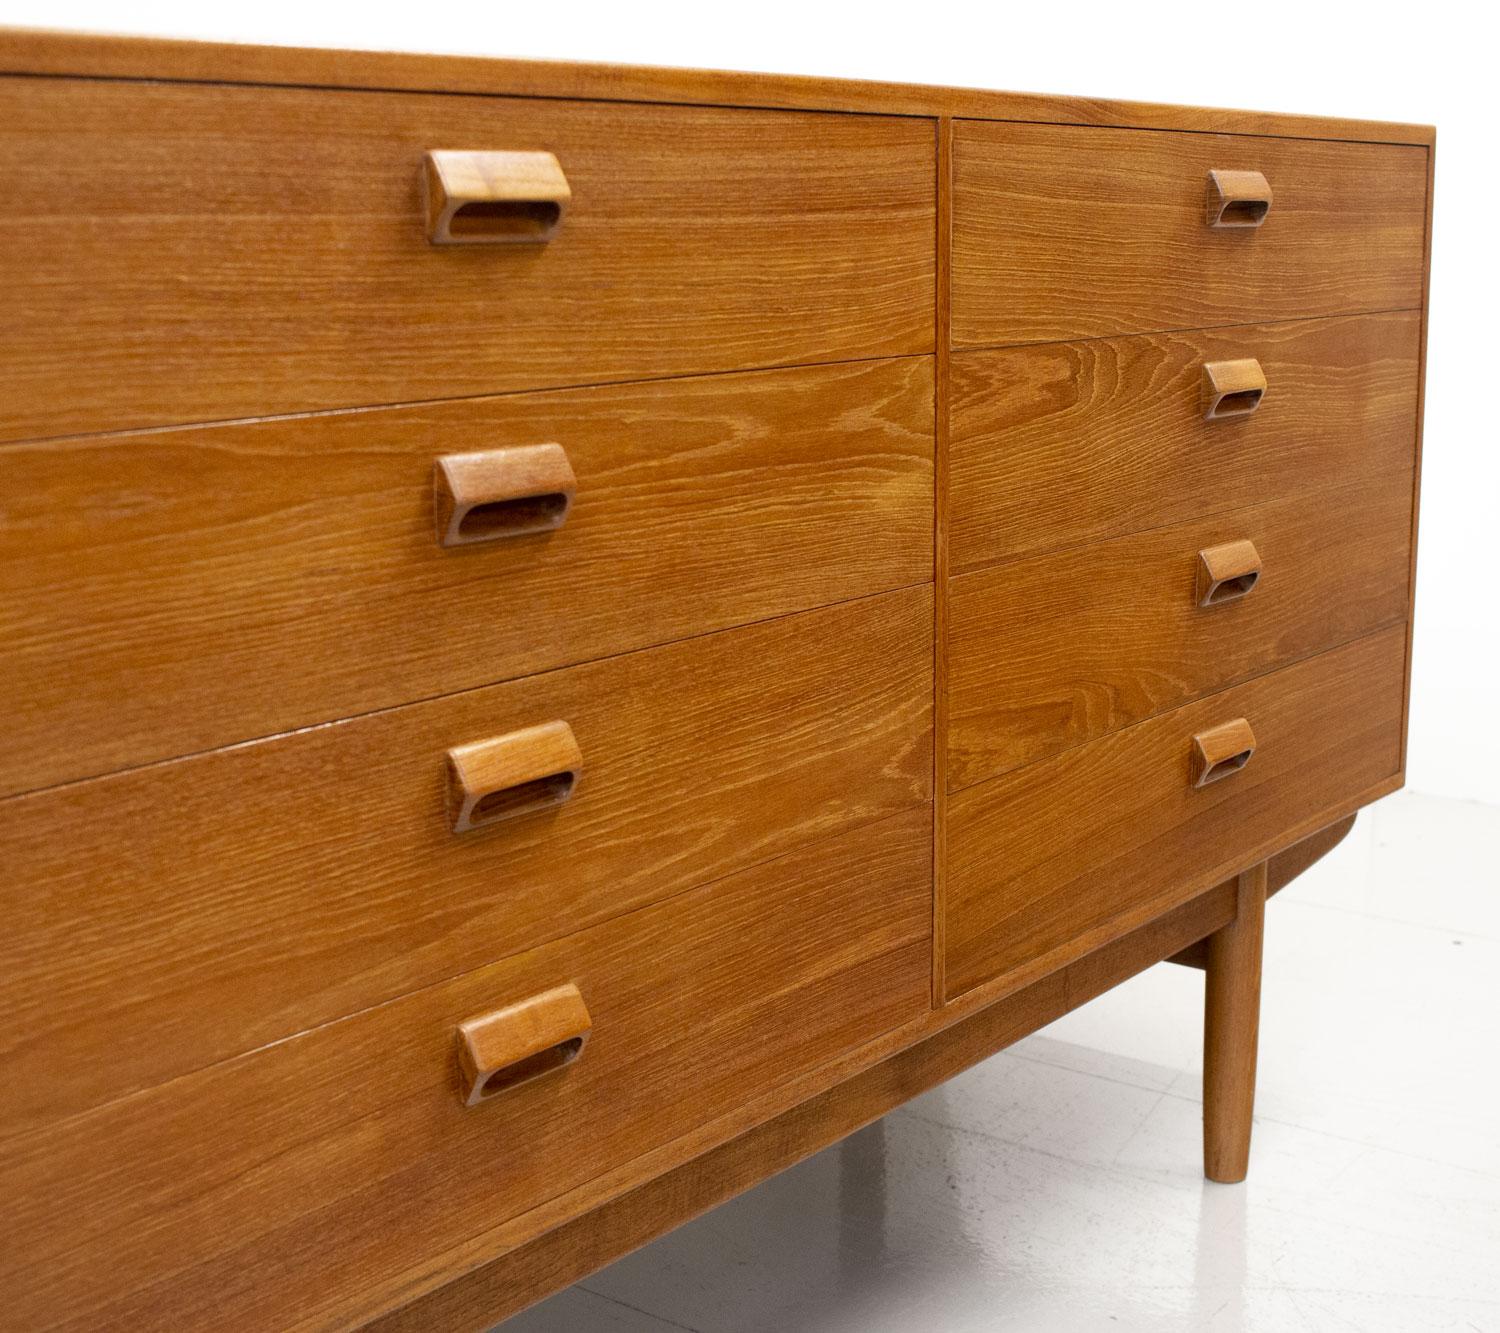 20th Century Danish Large Teak Chest of Drawers by Borge Mogensen for Soborg, 1950s For Sale